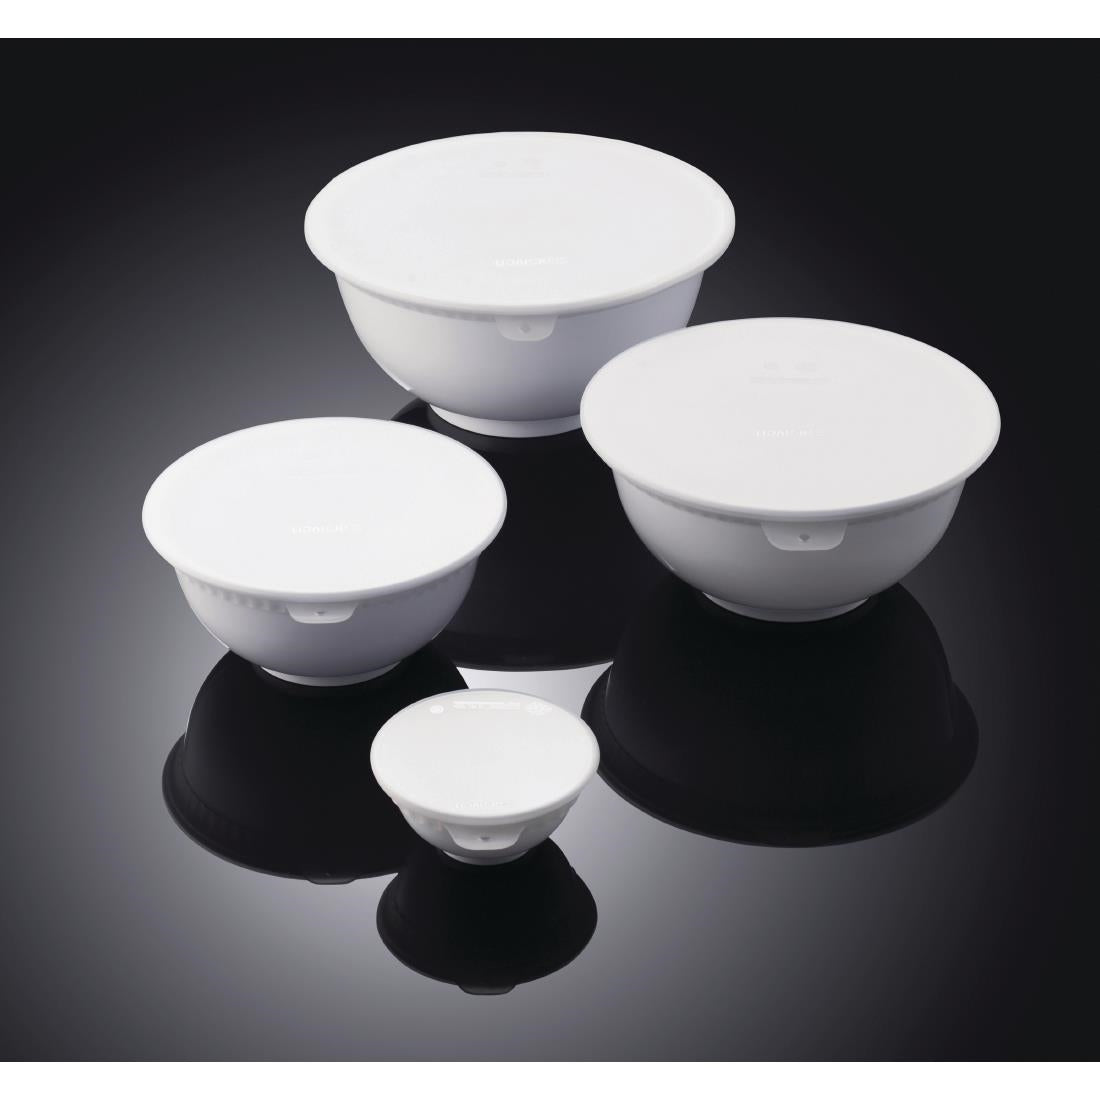 FP931 Araven Round Silicone Lid Clear 235mm JD Catering Equipment Solutions Ltd